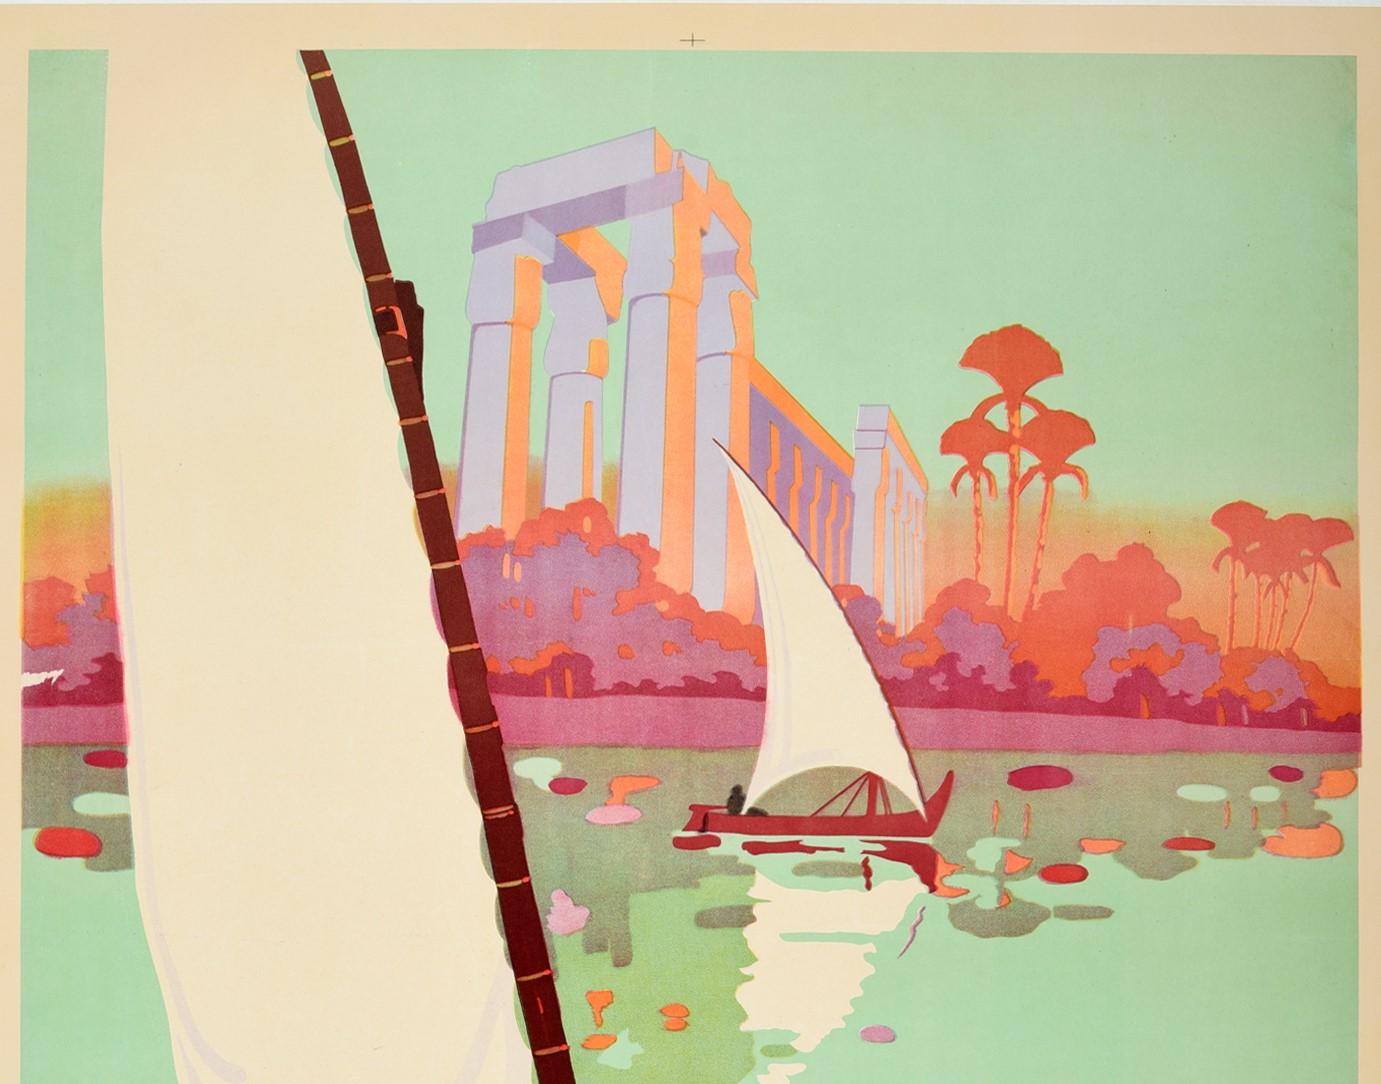 Original vintage travel poster for Egypt featuring a great illustration of traditional sailing boats / felucca and a man in a wooden rowing boat on the River Nile with ancient Egyptian ruins of historic columns and fan palm trees on the shore in the